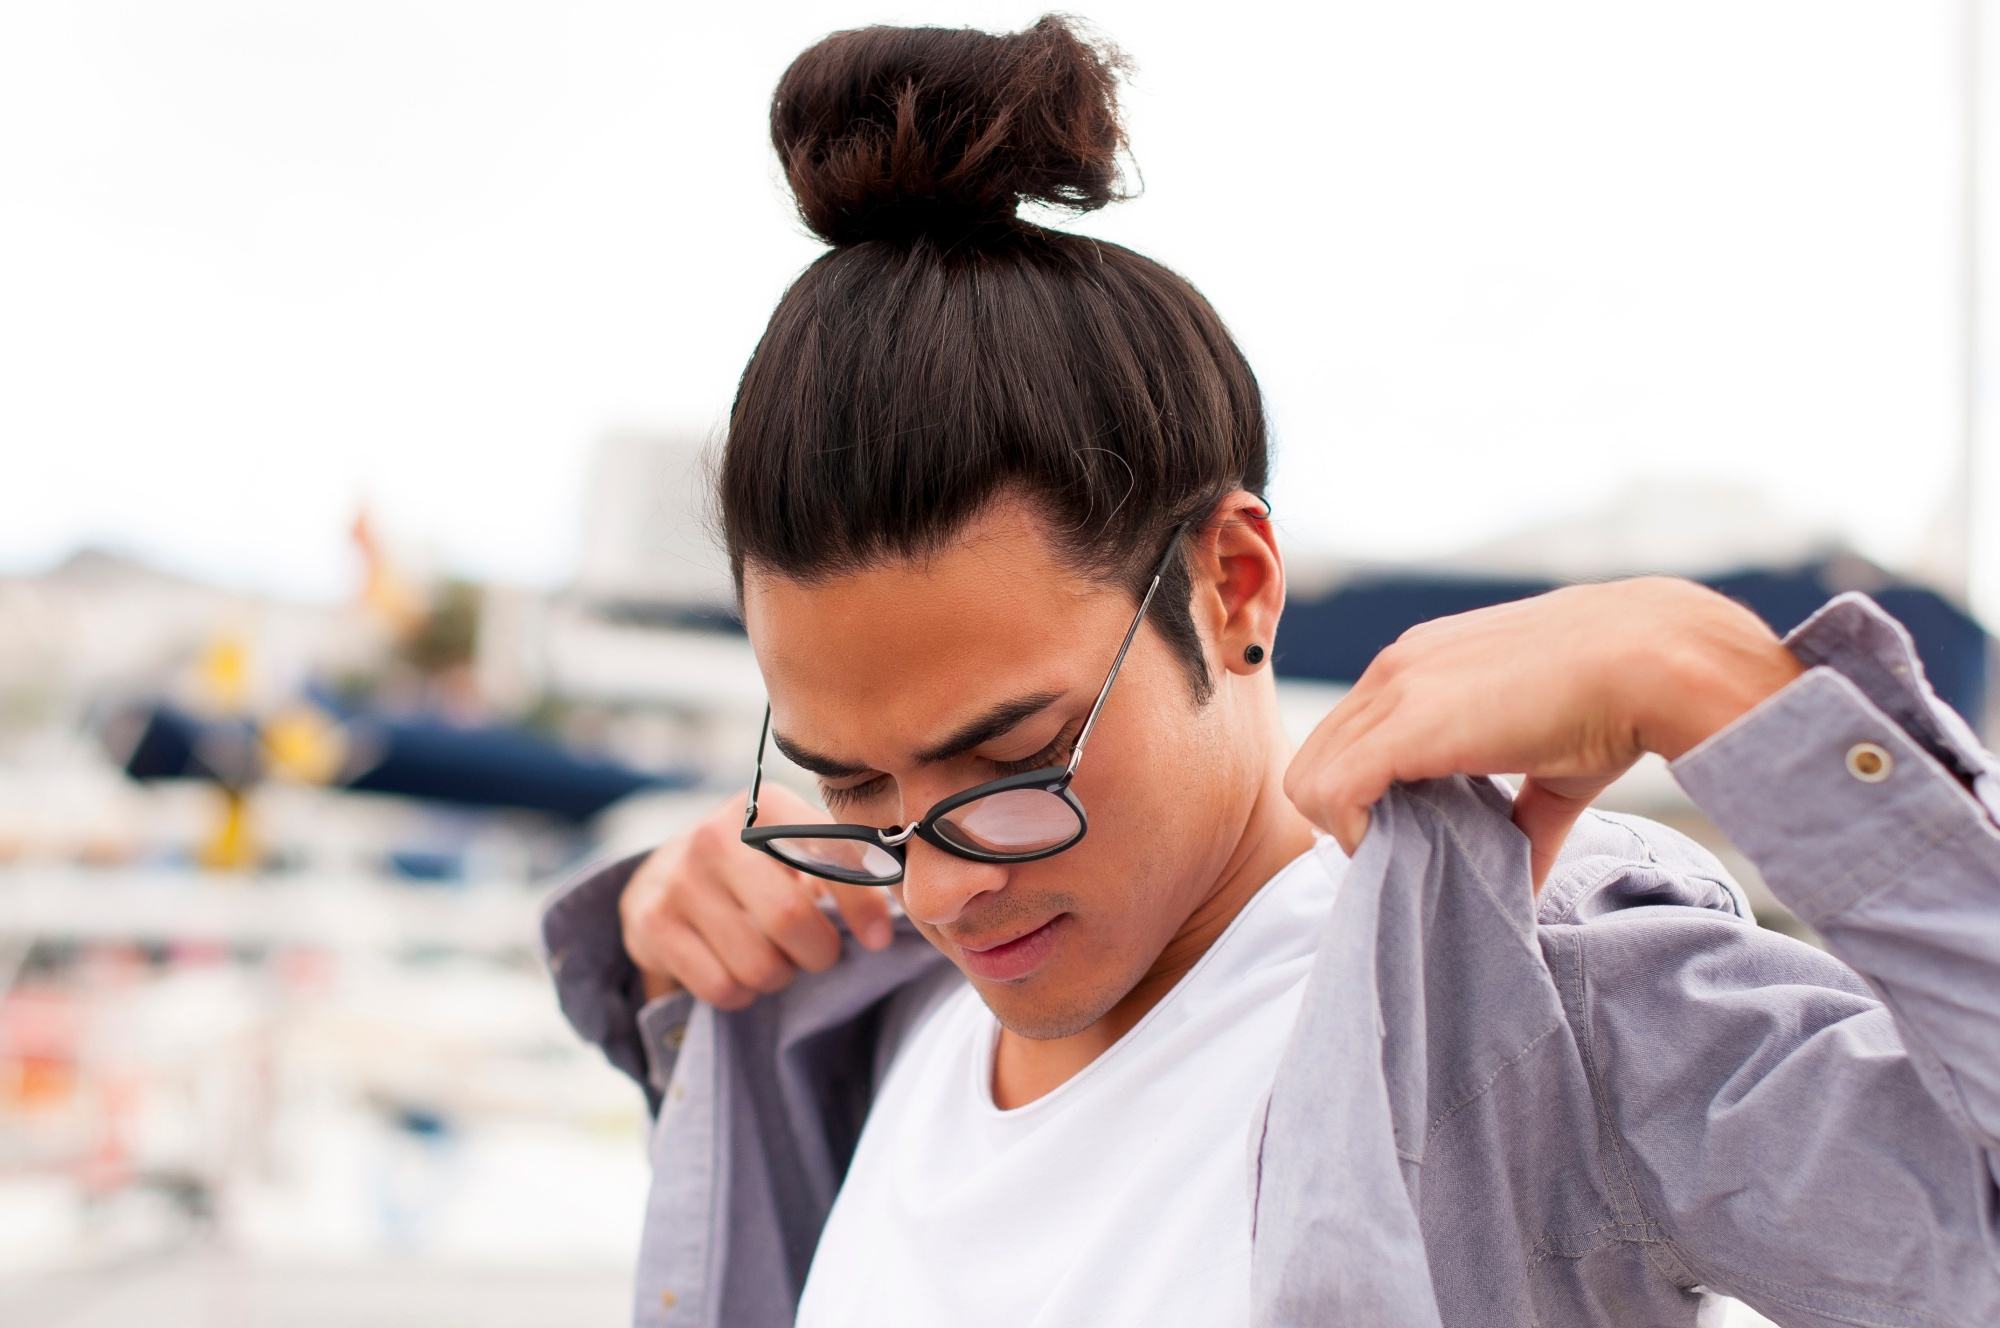 Asian man bun: Man with brown skin with long dark hair in a top knot